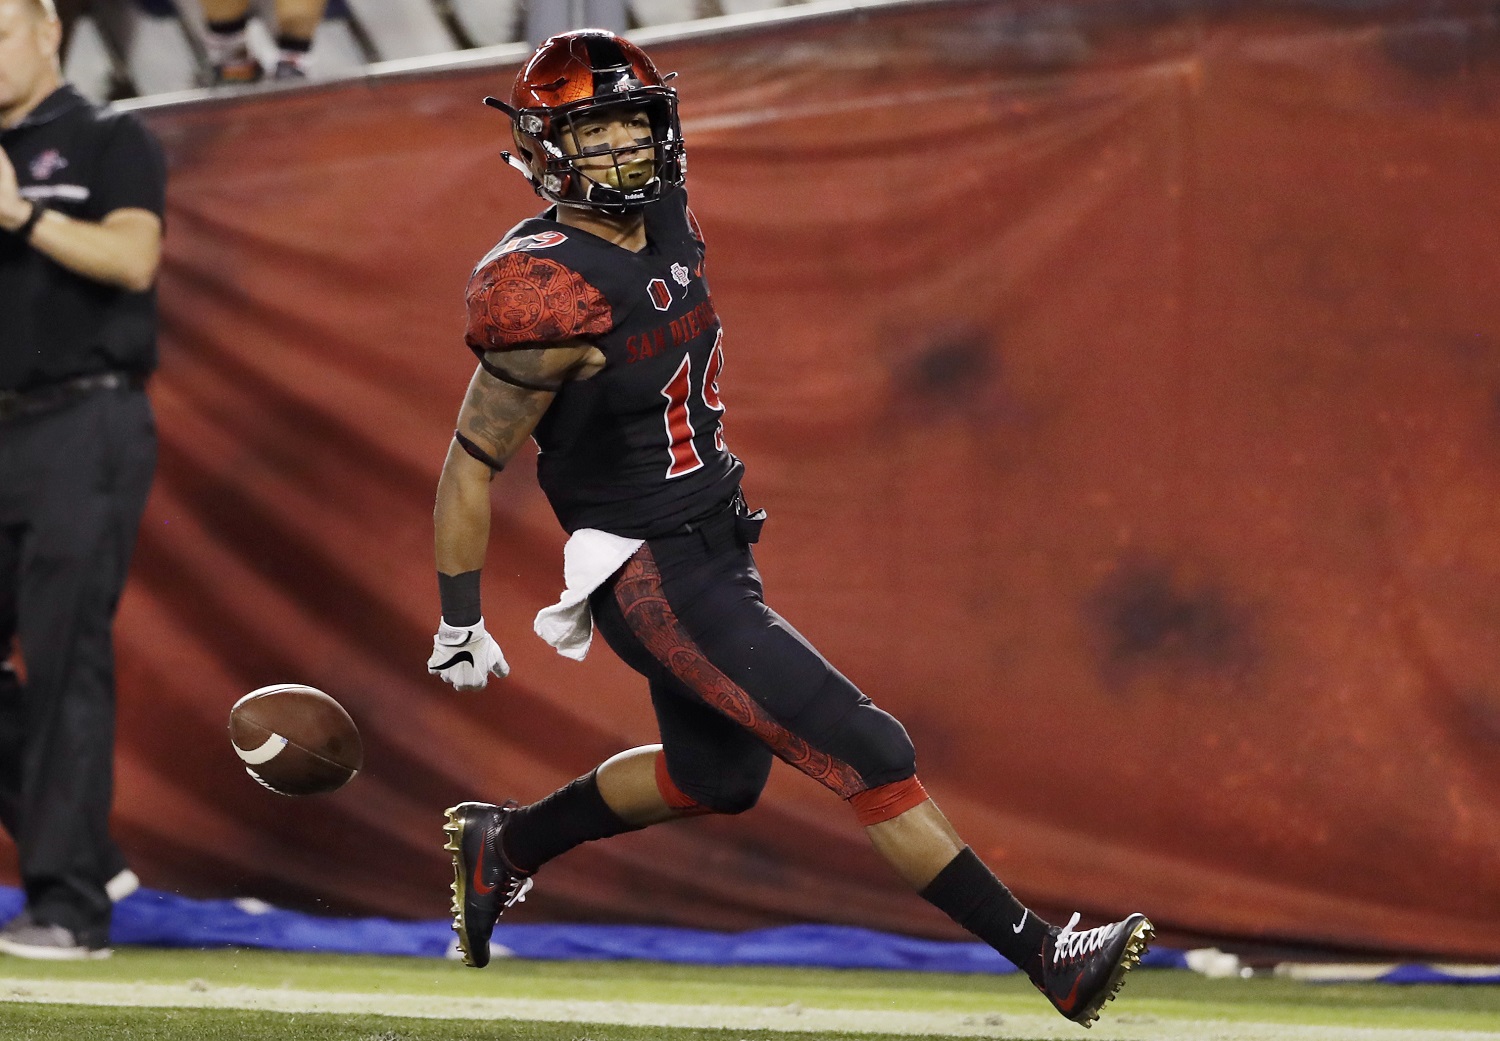 San Diego State running back Donnel Pumphrey scores a touchdown during the first half of an NCAA college football game against San Jose State Friday, Oct. 21, 2016, in San Diego. (AP Photo/Gregory Bull)